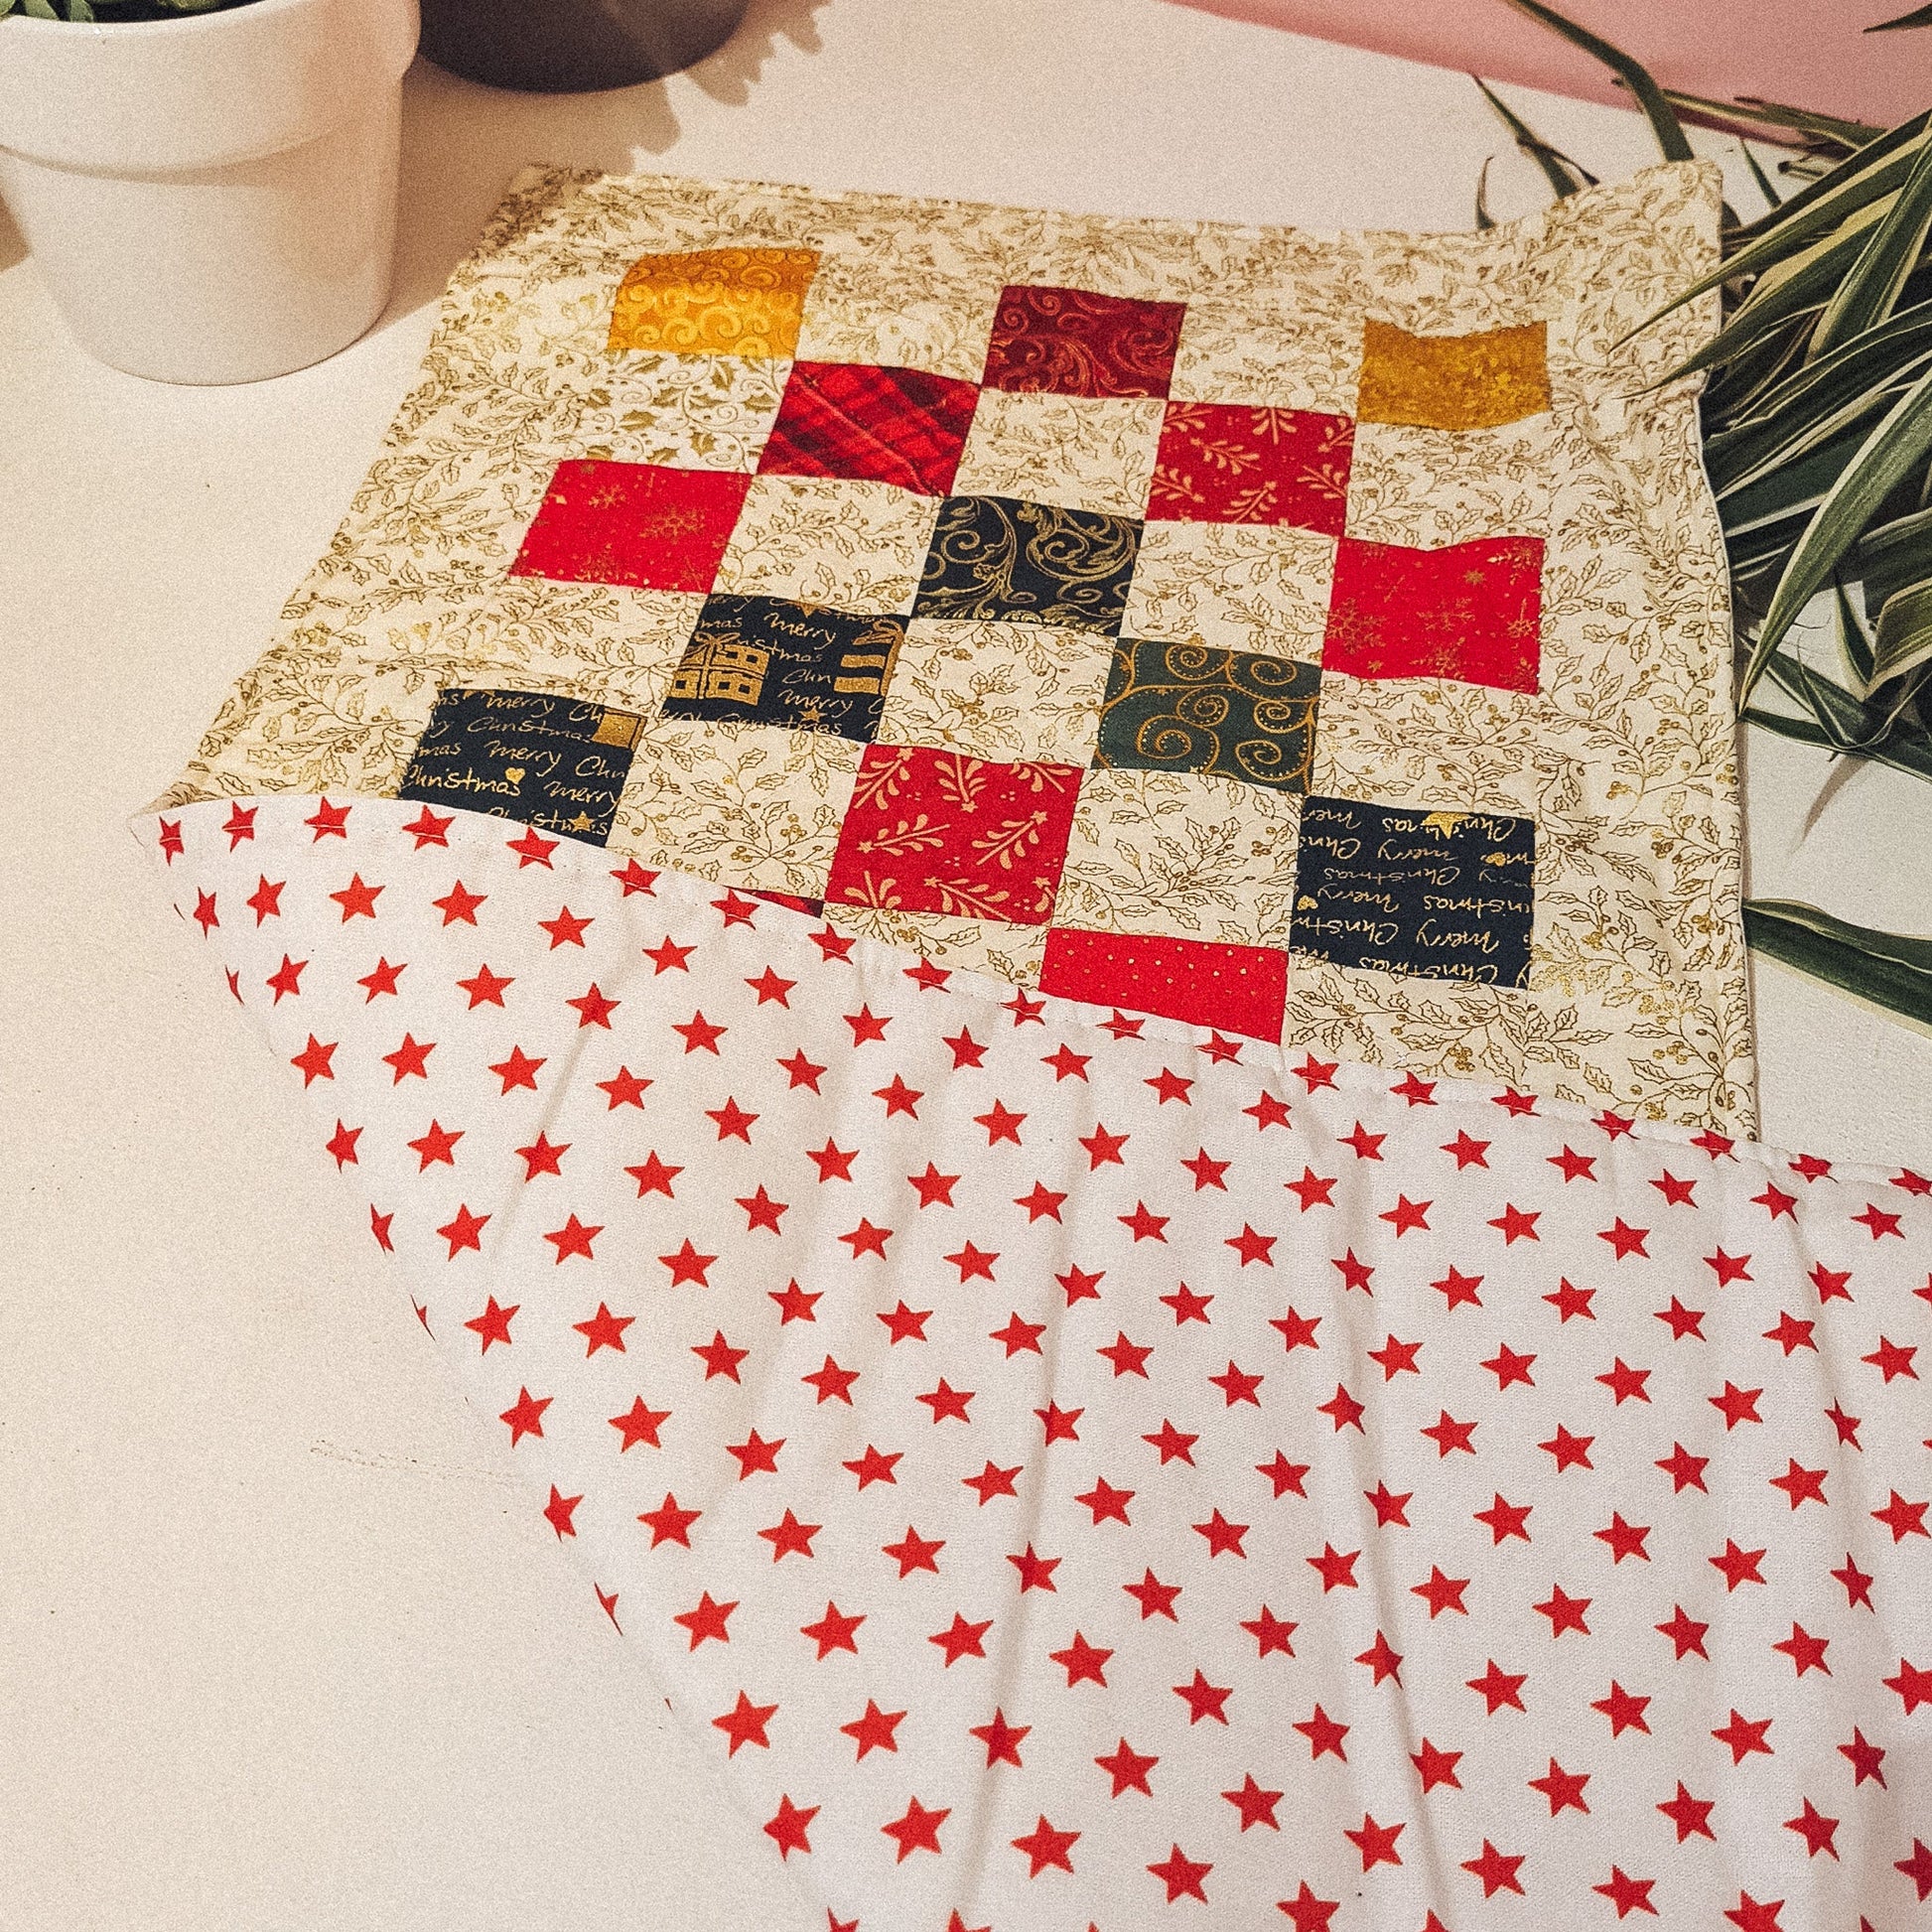 Square Pattern Patchwork Festive Table Centre Piece - F&B Crafts - F&B Crafts